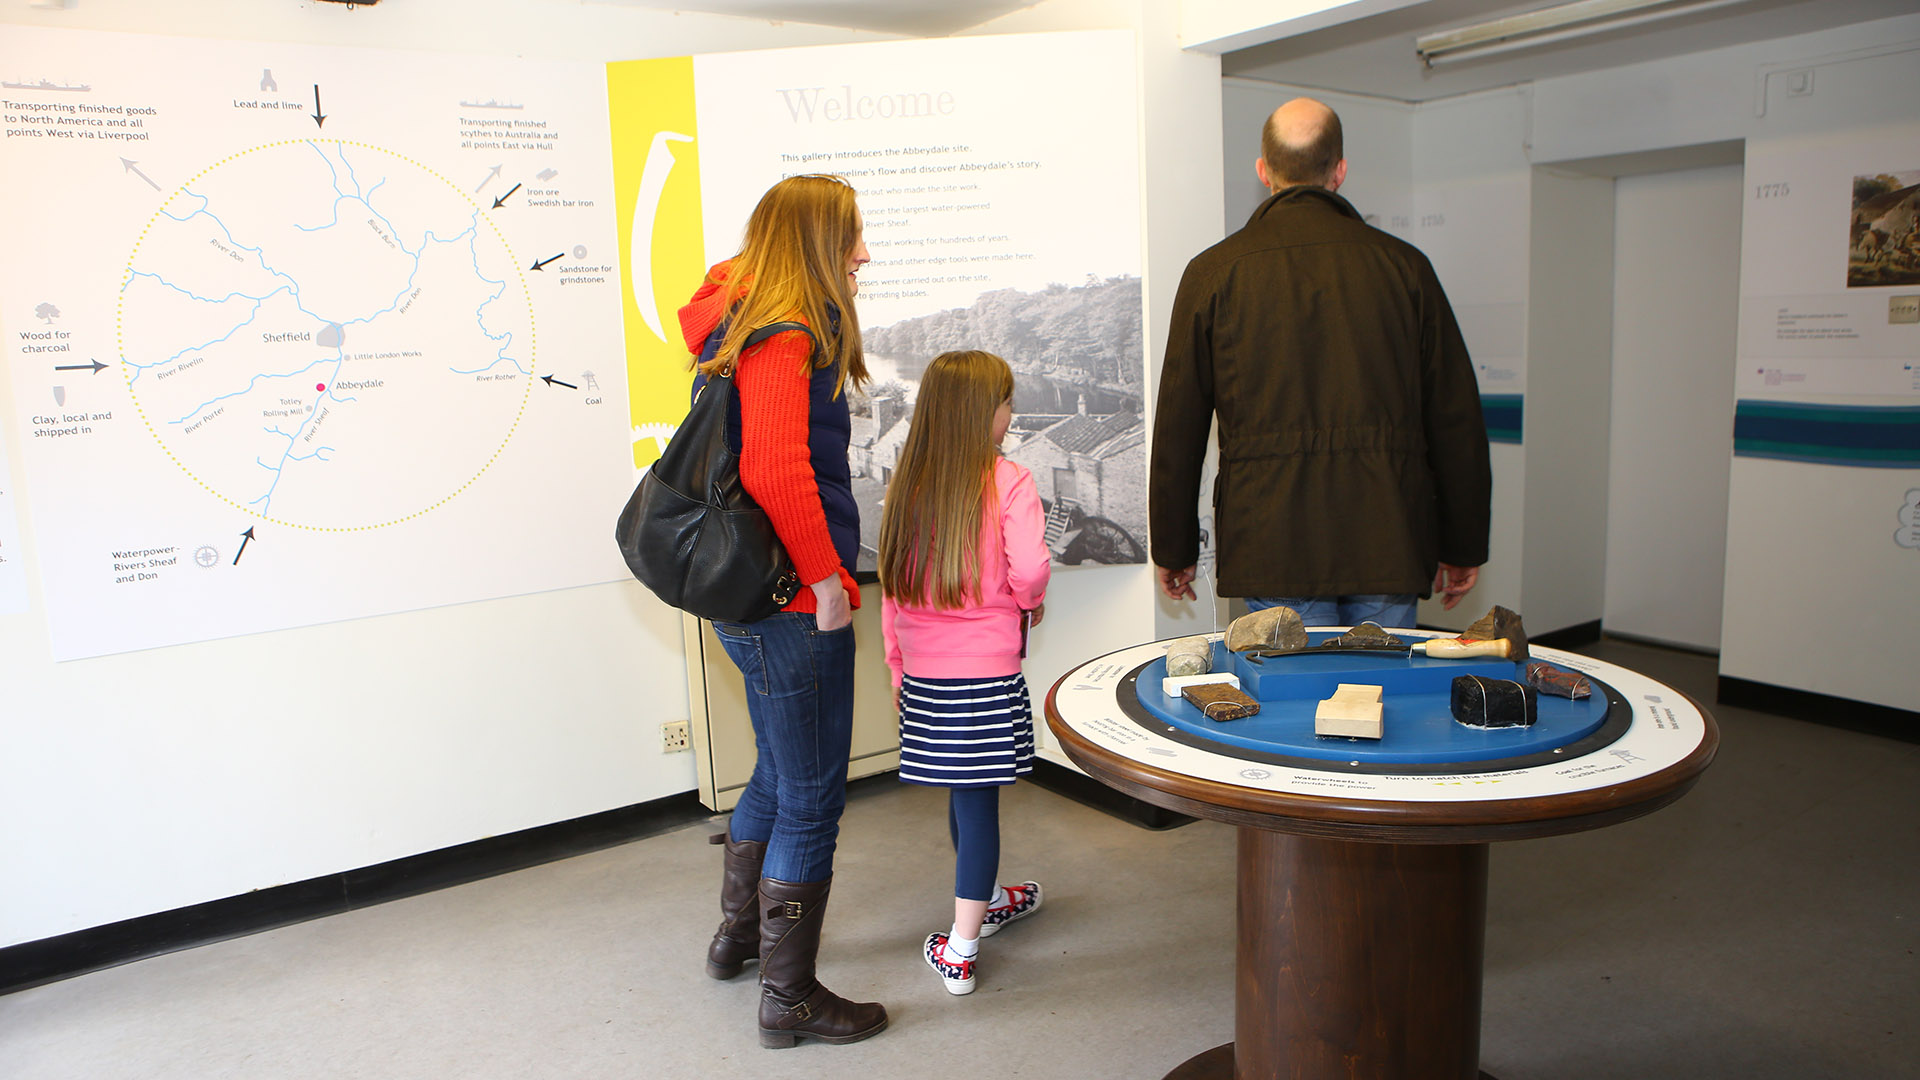 Two adults and a child viewing displays in the museum.